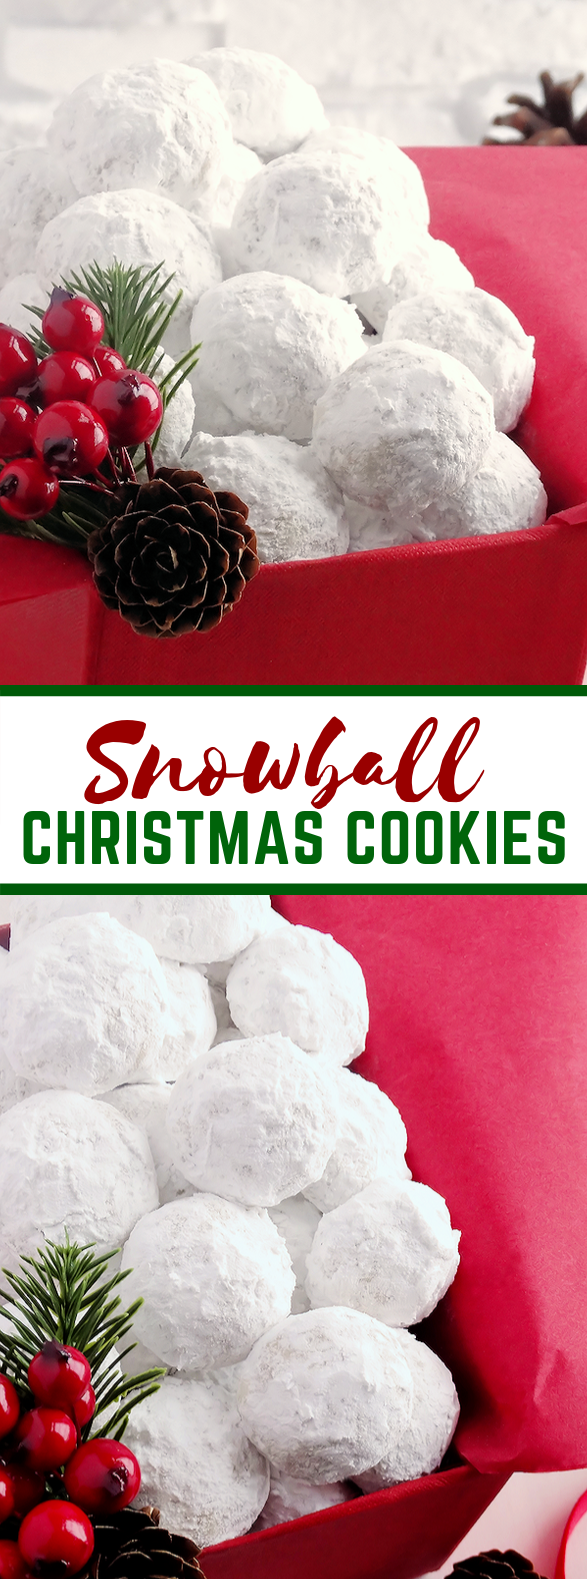 Snowball Christmas Cookies {best ever} #desserts #christmas